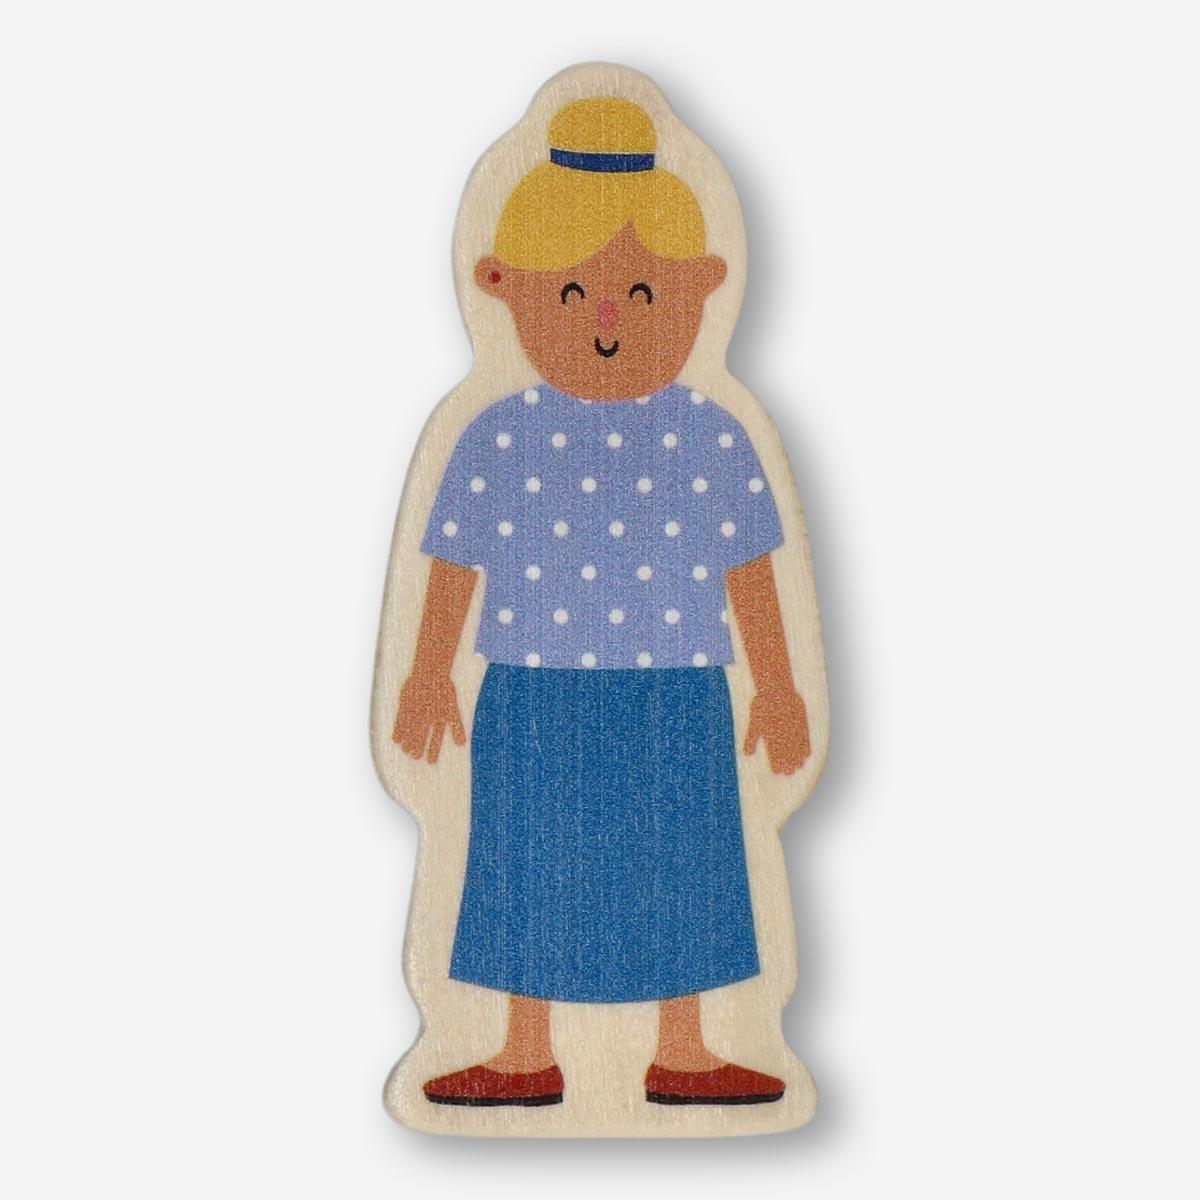 Blue wooden doll